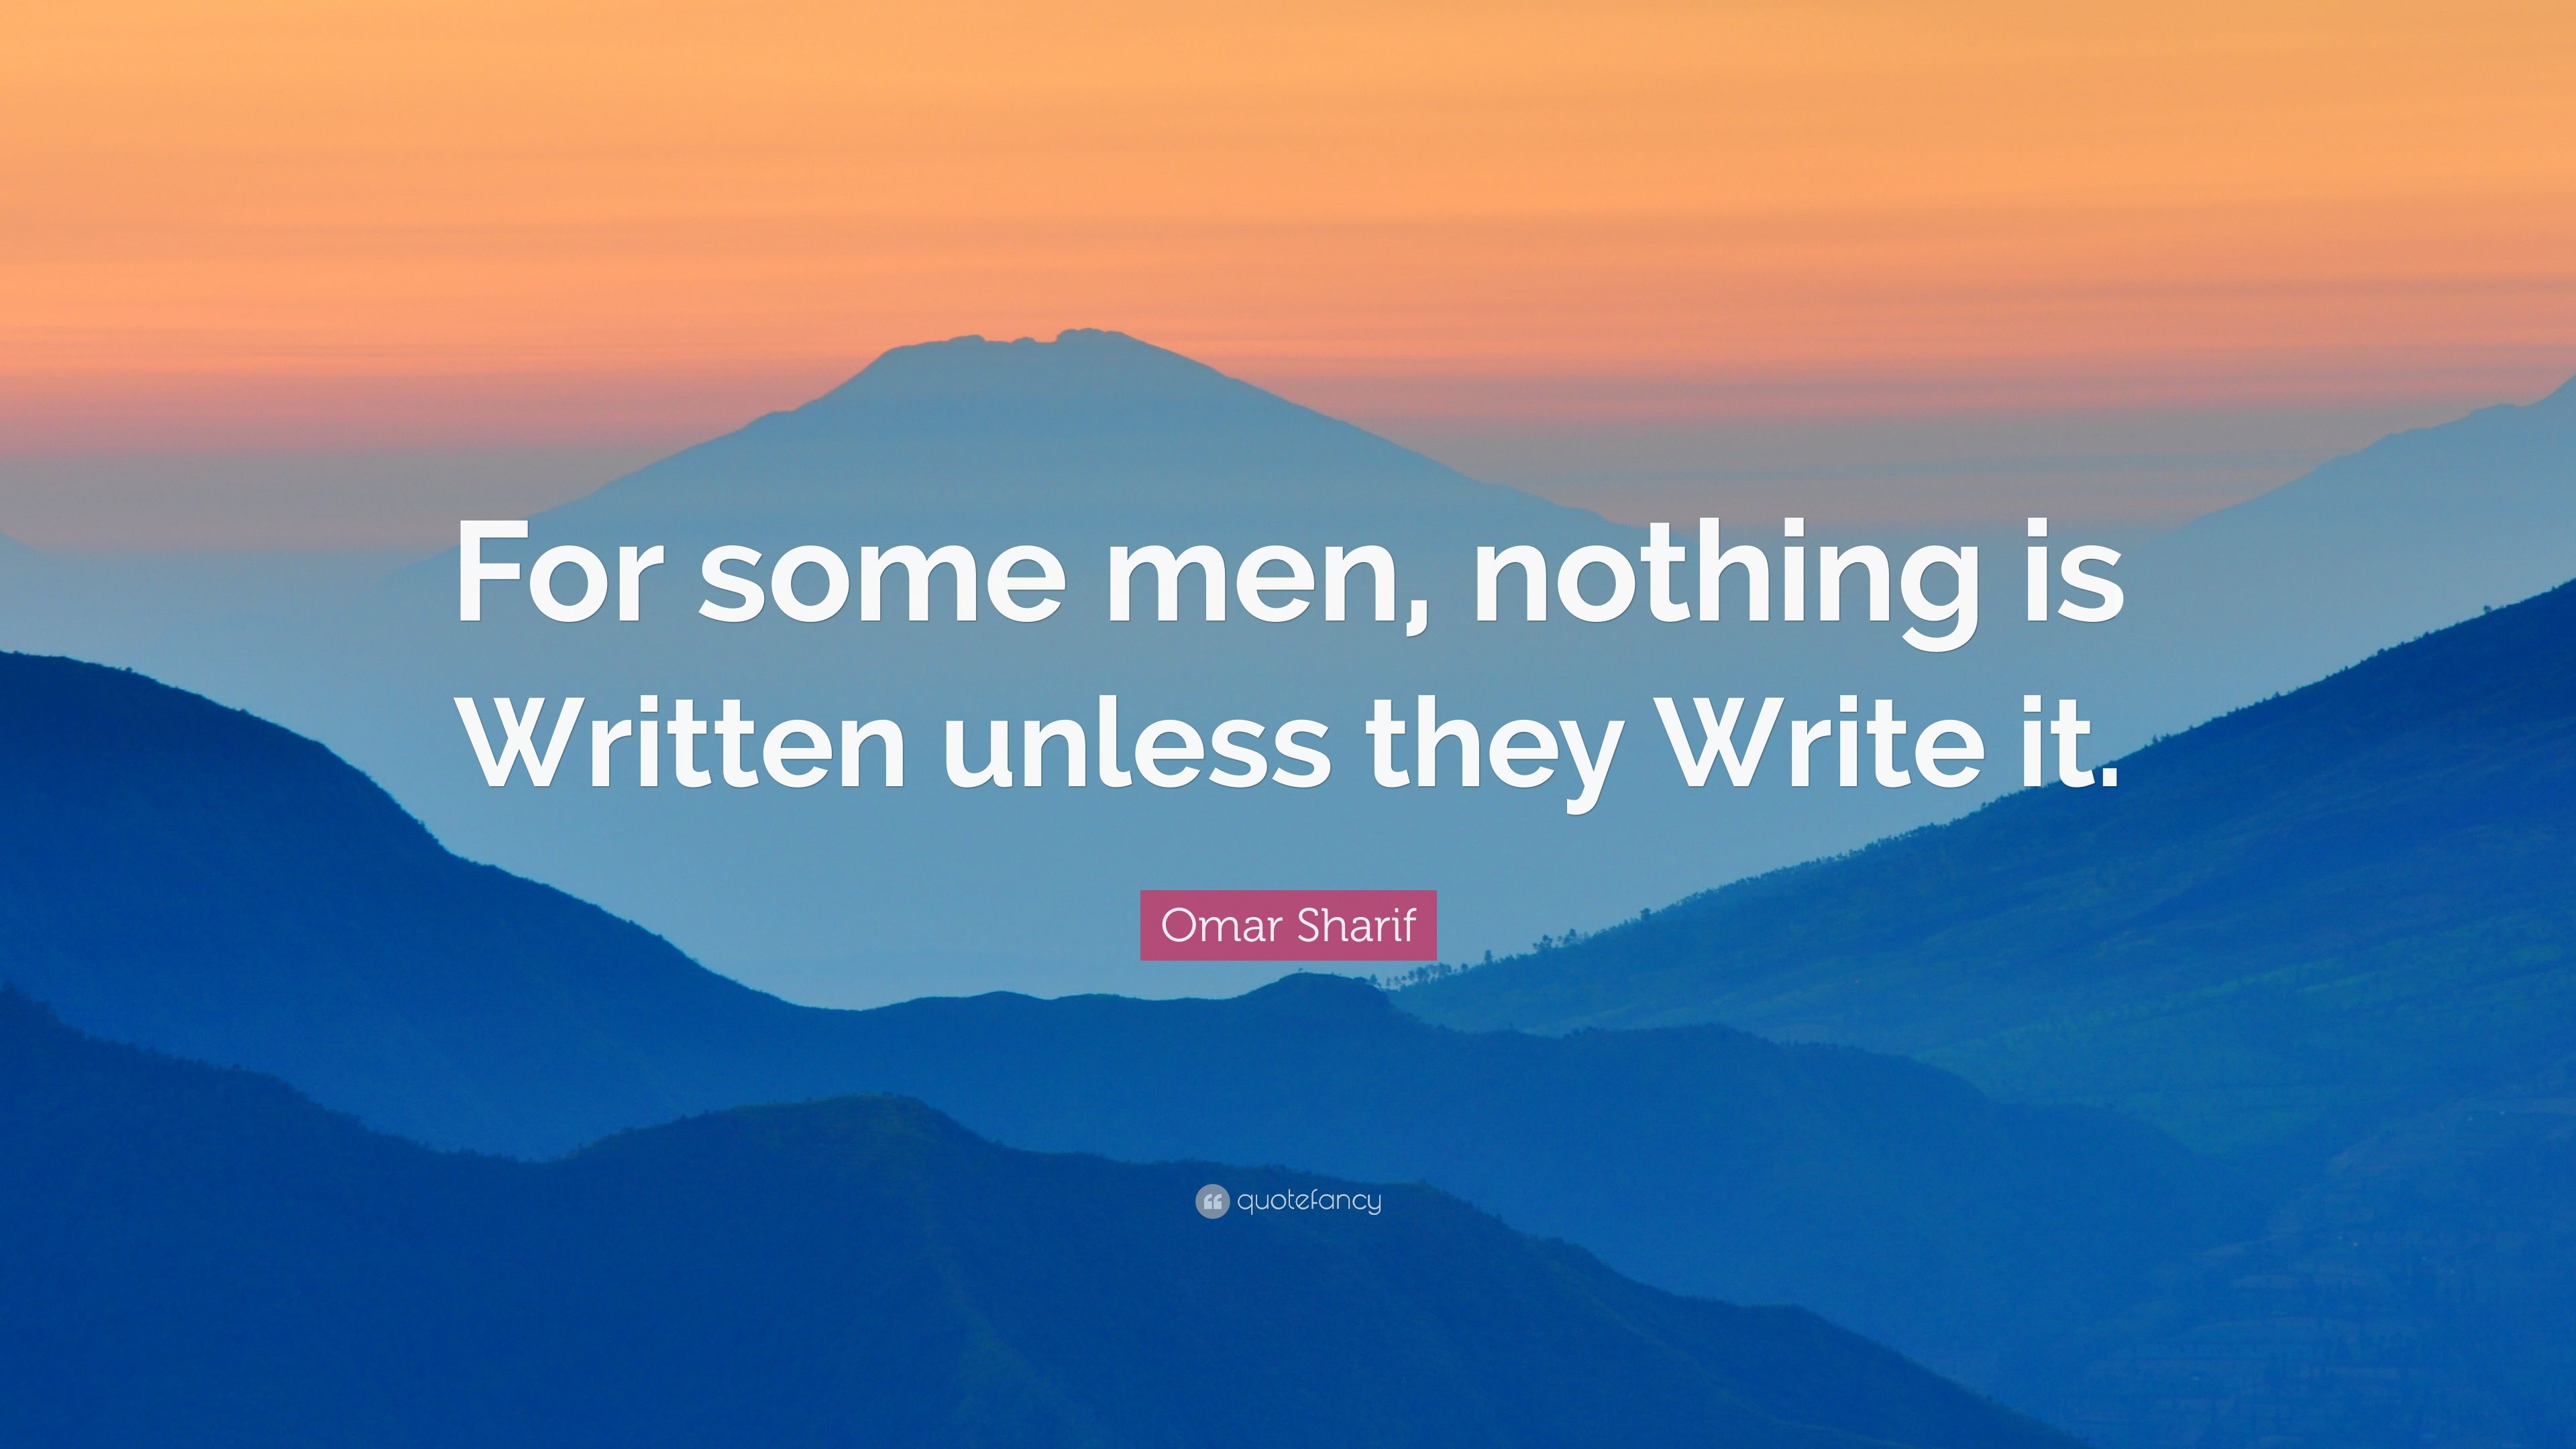 Omar Sharif Quote: “For some men, nothing is Written unless they Write it.” (7 wallpaper)